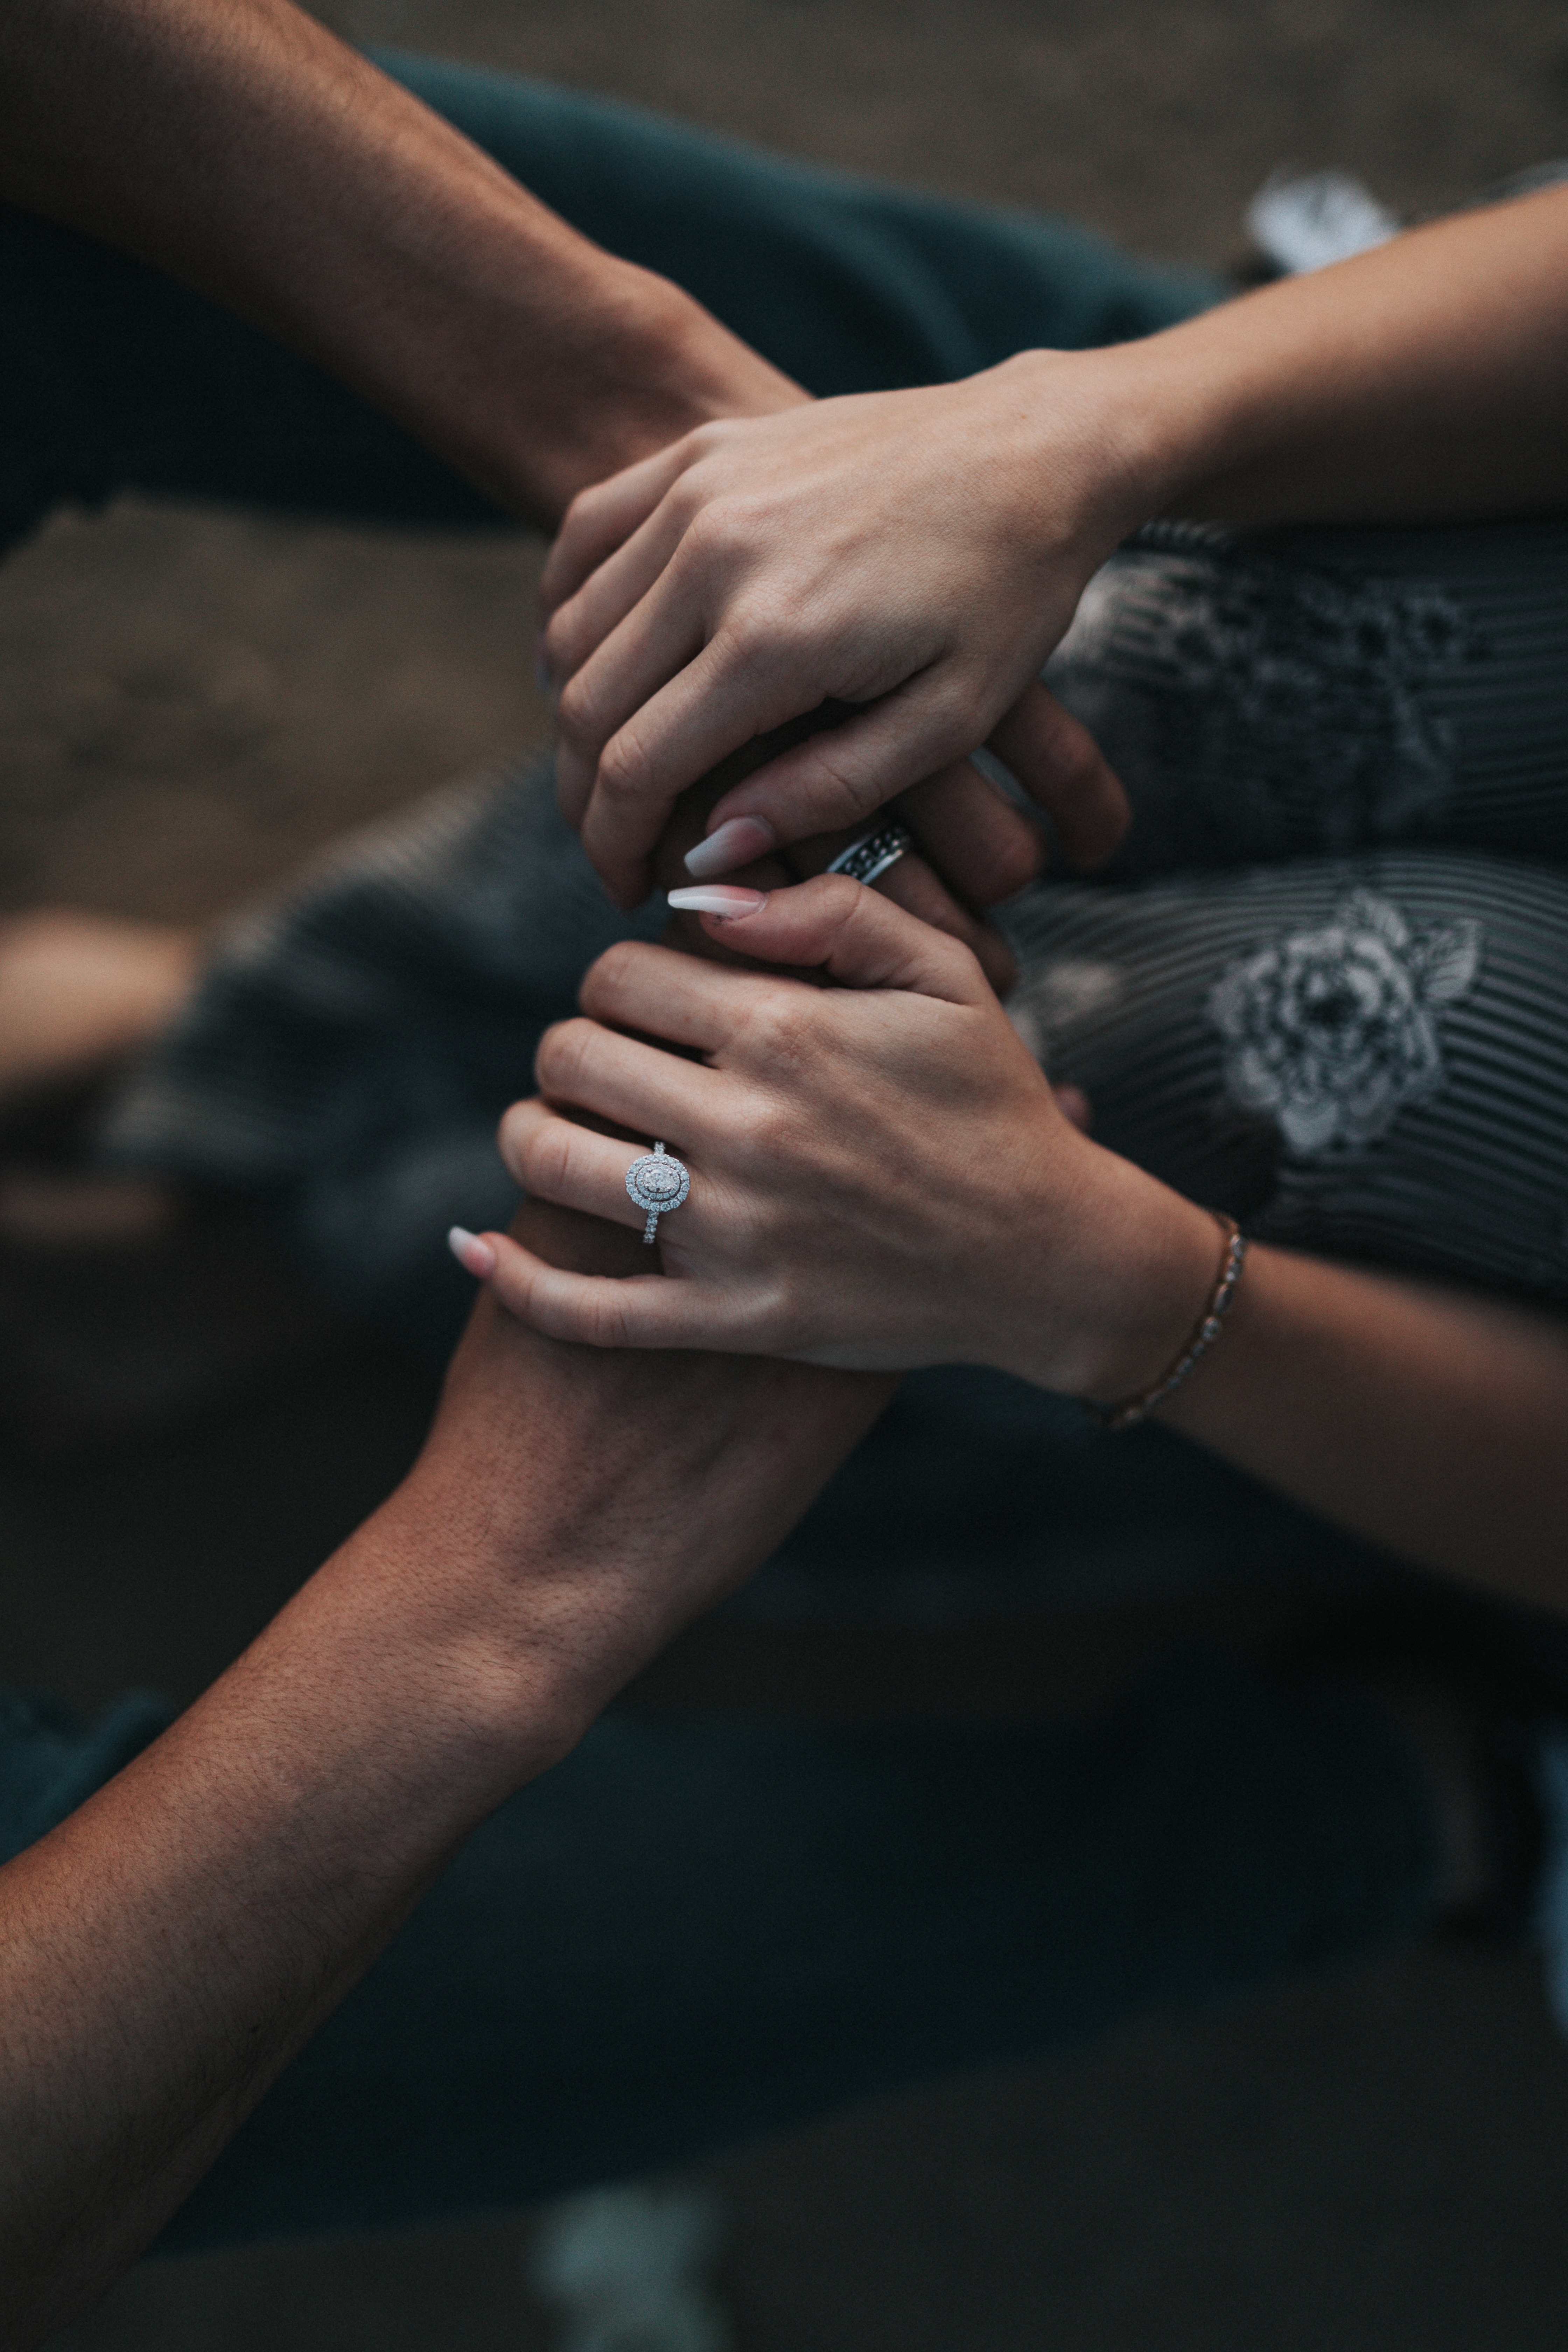 A photo of two people holding hands  | Source: Unsplash